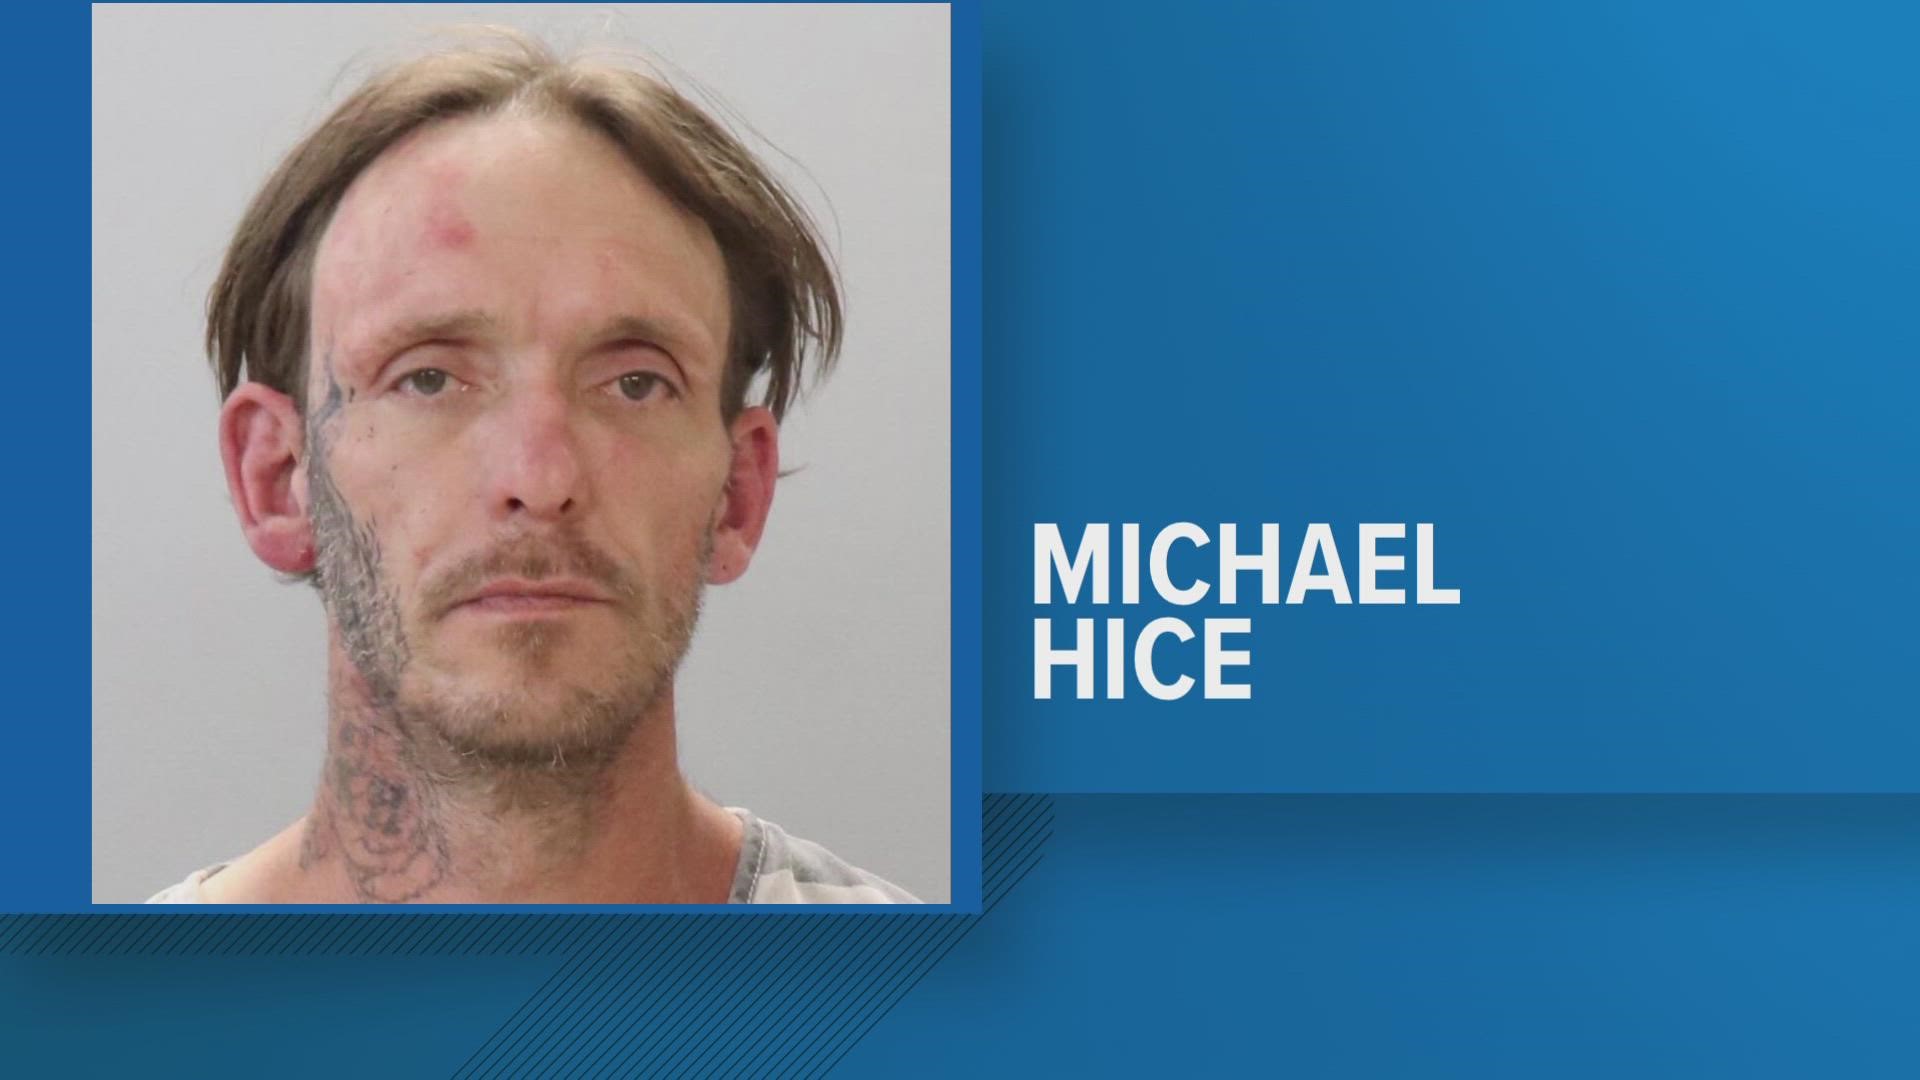 Knoxville Police said Christopher Michael Hice, 42, was wanted for second-degree murder in Palm Beach County, Florida.